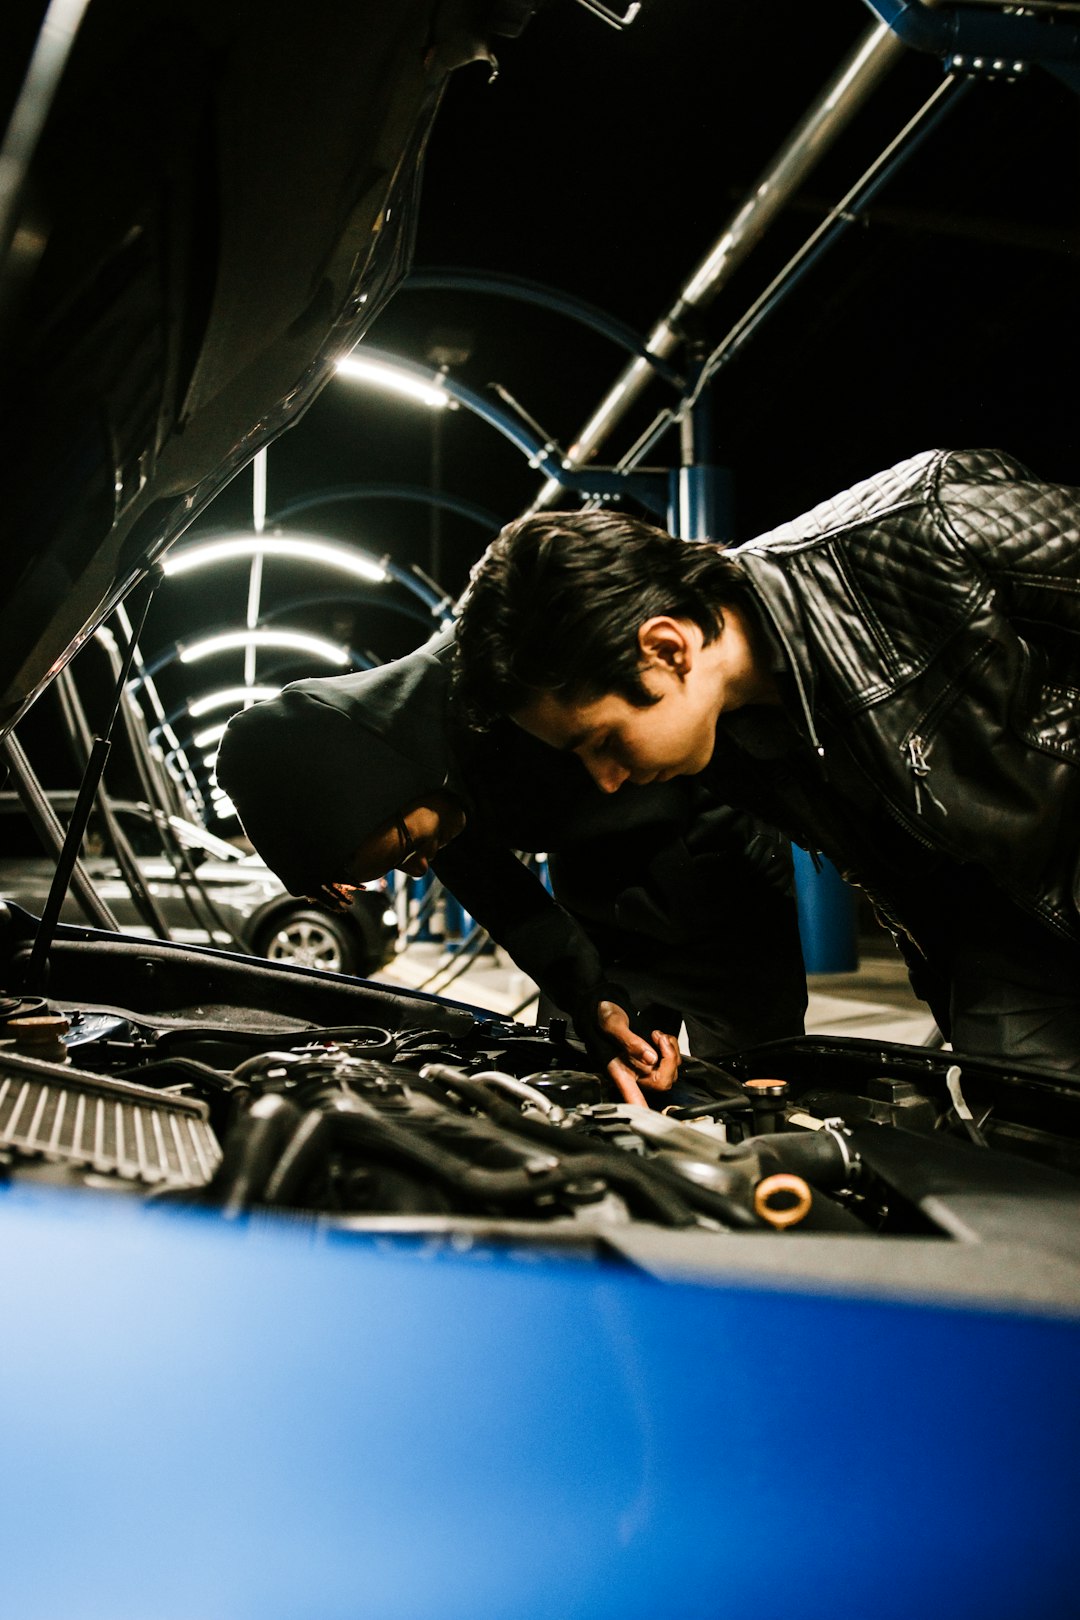 man in black leather jacket and blue denim jeans sitting on black and silver car engine